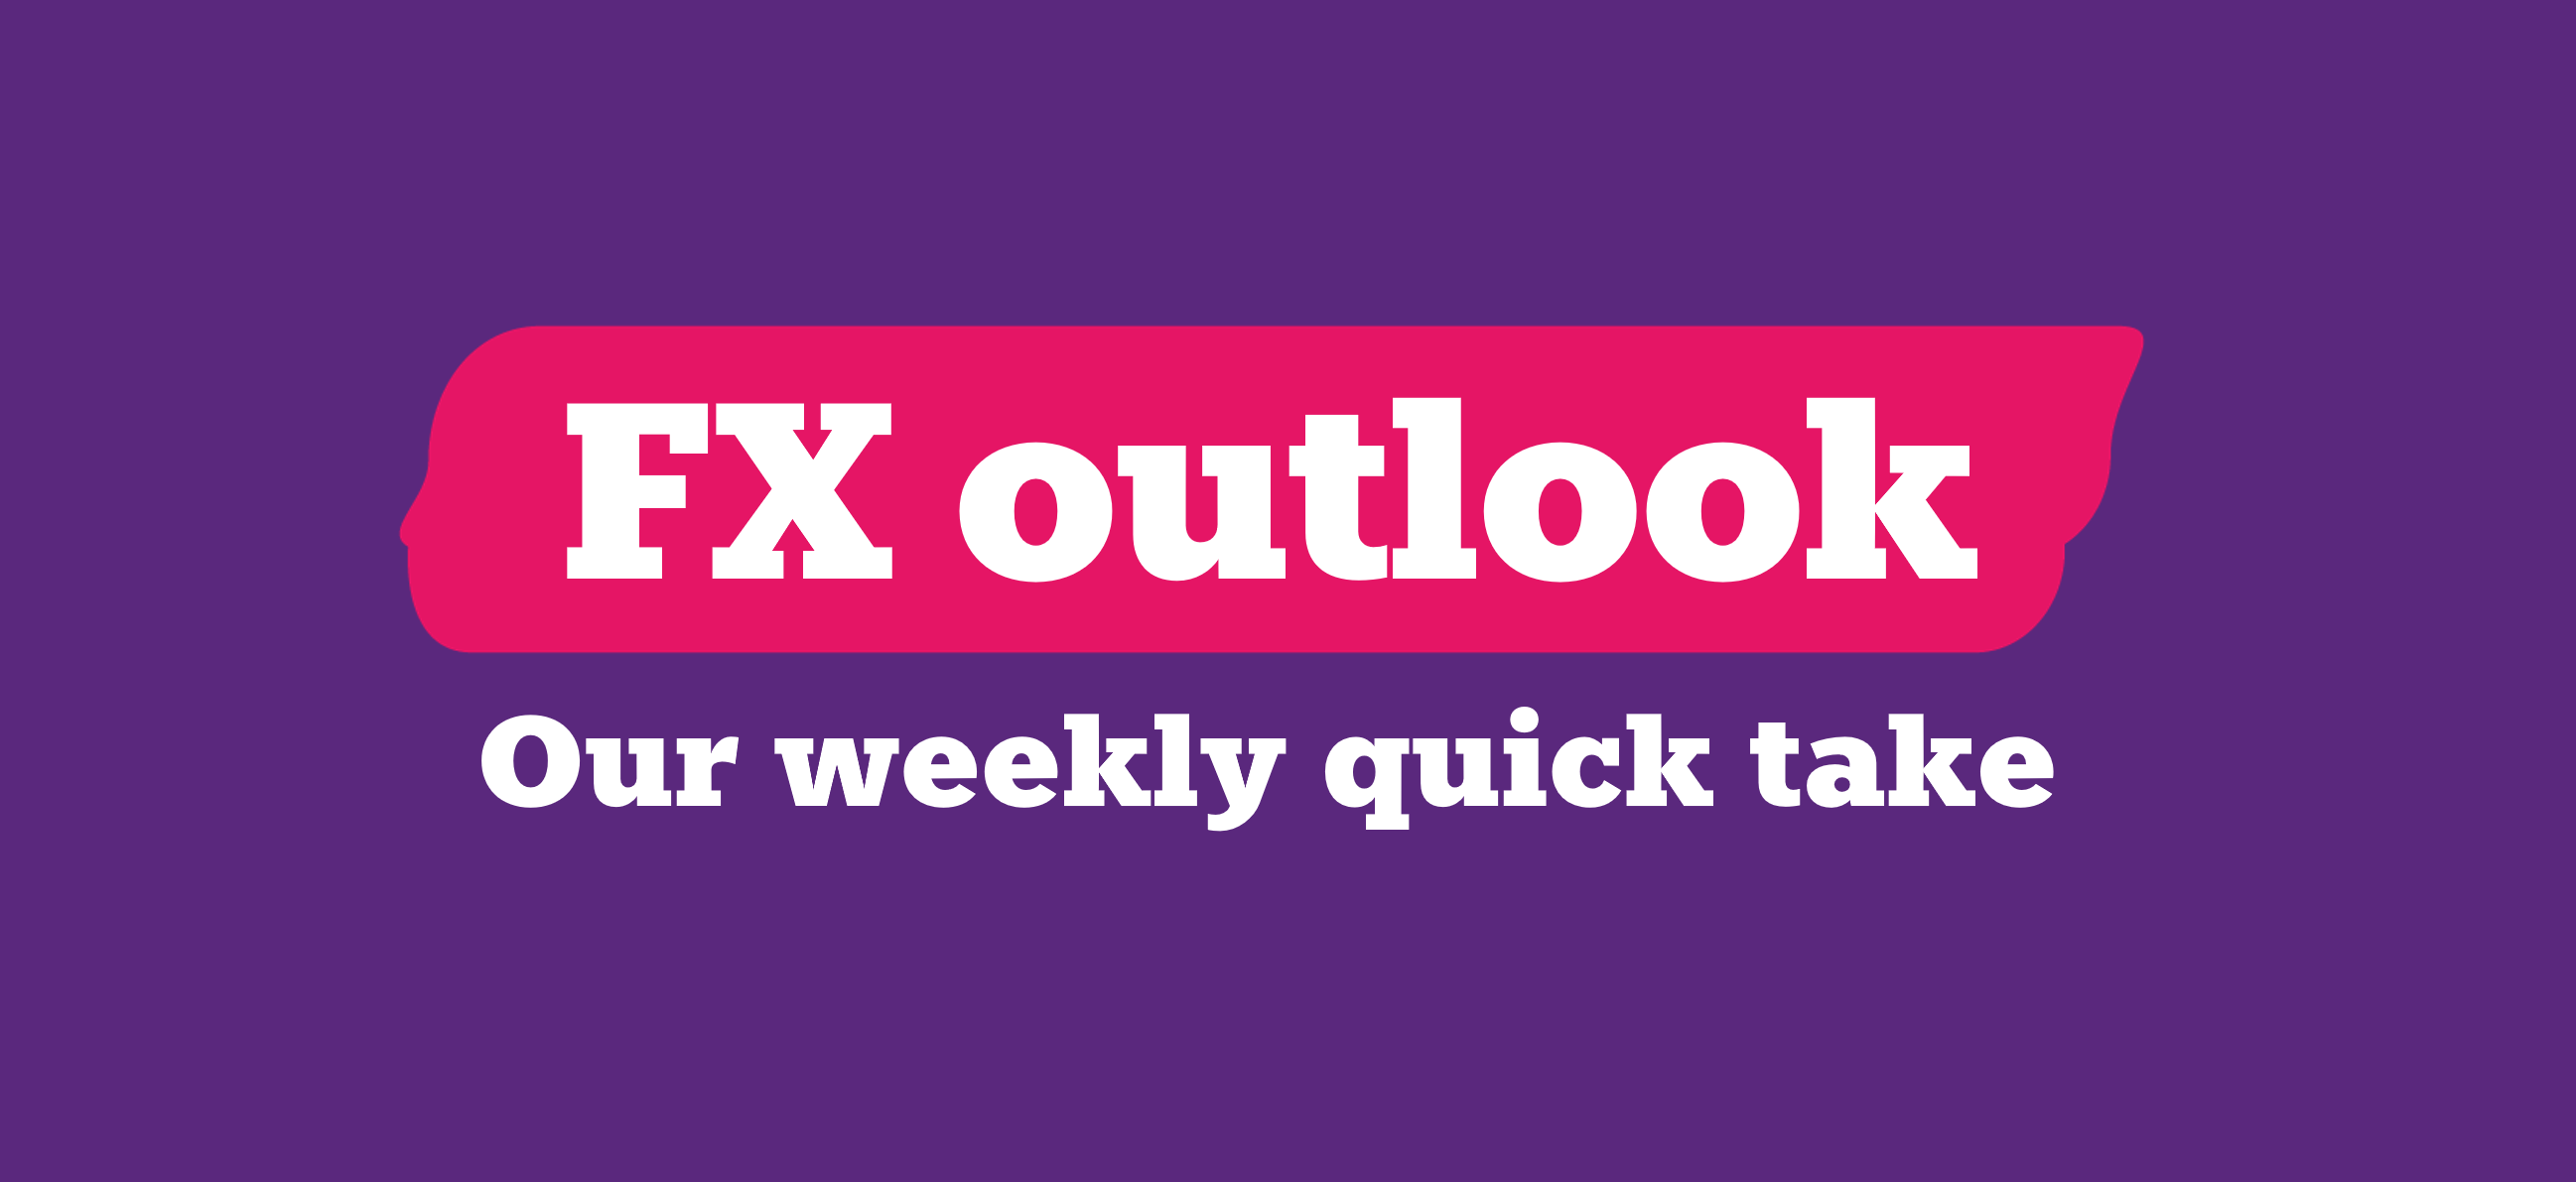 FX Outlook Weekly quick take 